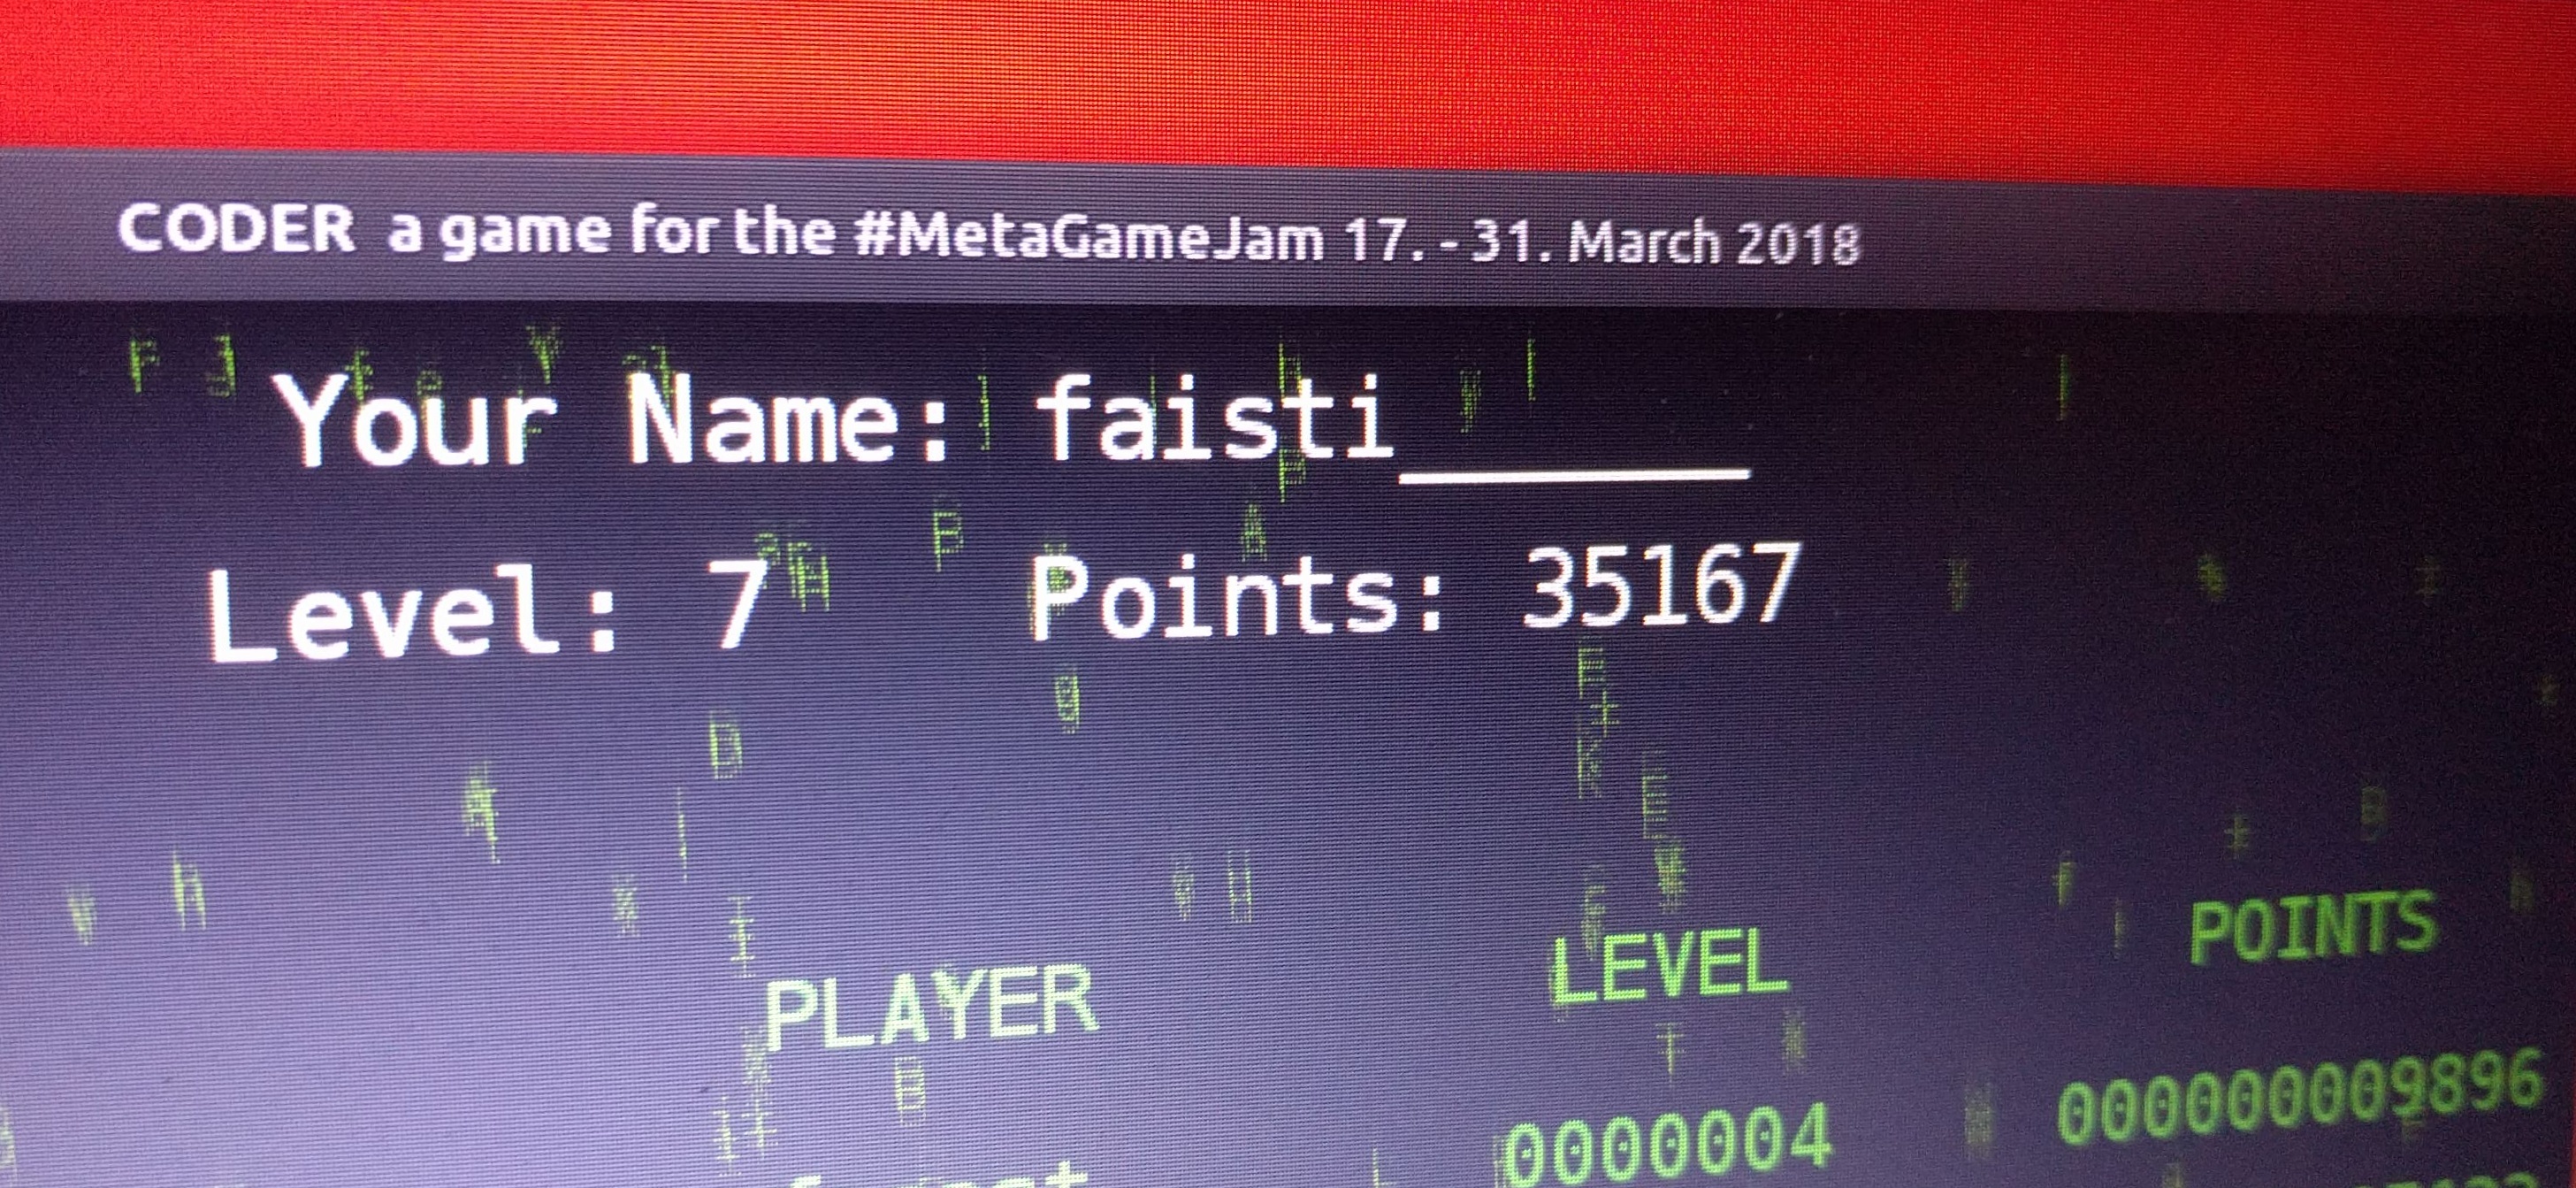 Game code win. Coding game. Game Coder программа. Meta game Jam. Points for Level of the game.